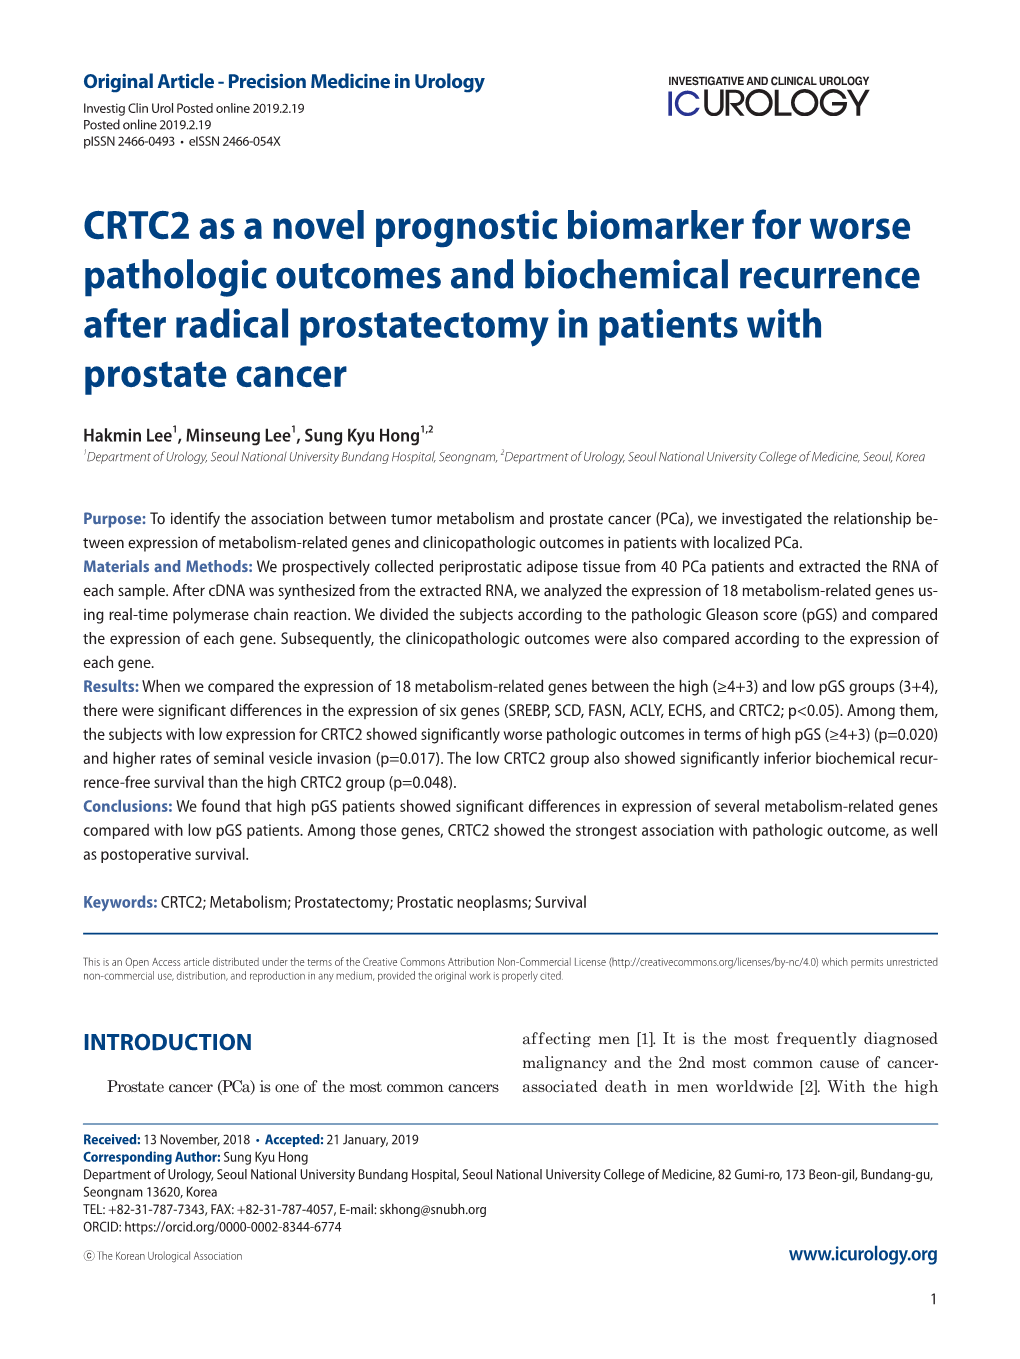 CRTC2 As a Novel Prognostic Biomarker for Worse Pathologic Outcomes and Biochemical Recurrence After Radical Prostatectomy in Patients with Prostate Cancer